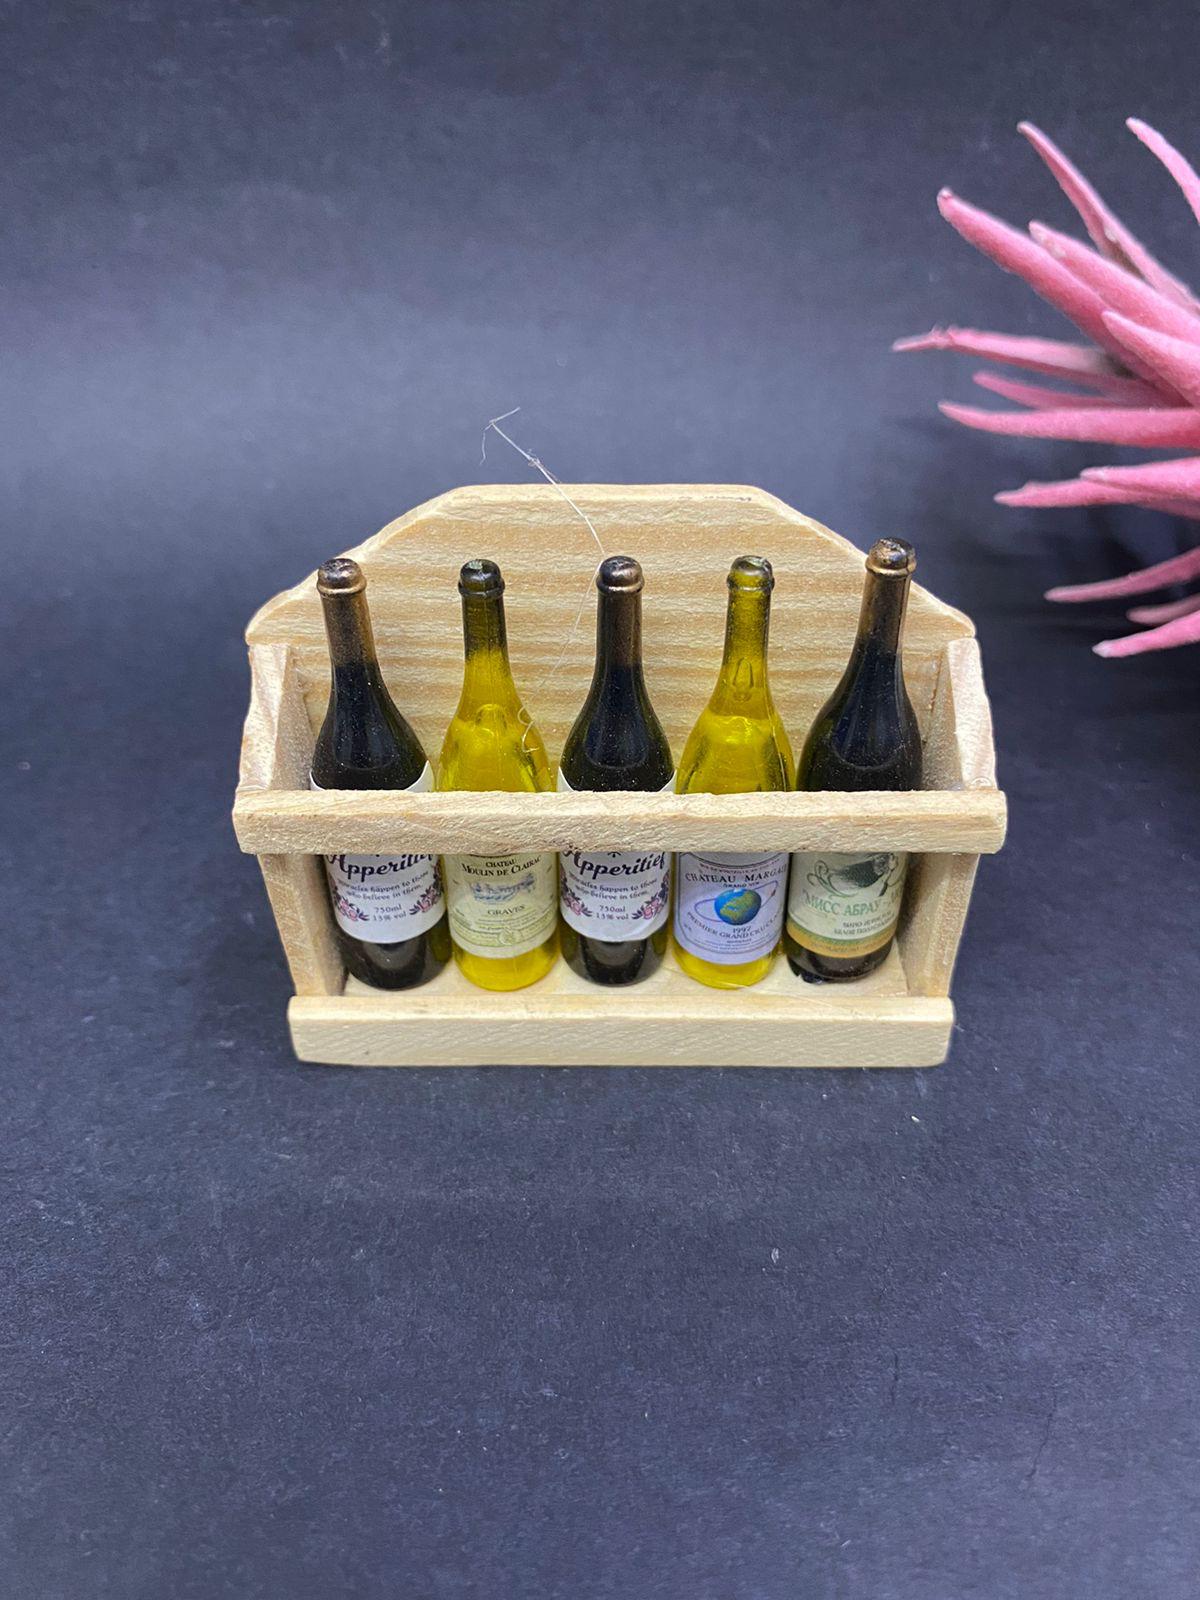 Luxurious Wine Bottle In Case Fridge Magnets Souvenir Gifting's From Tamrapatra